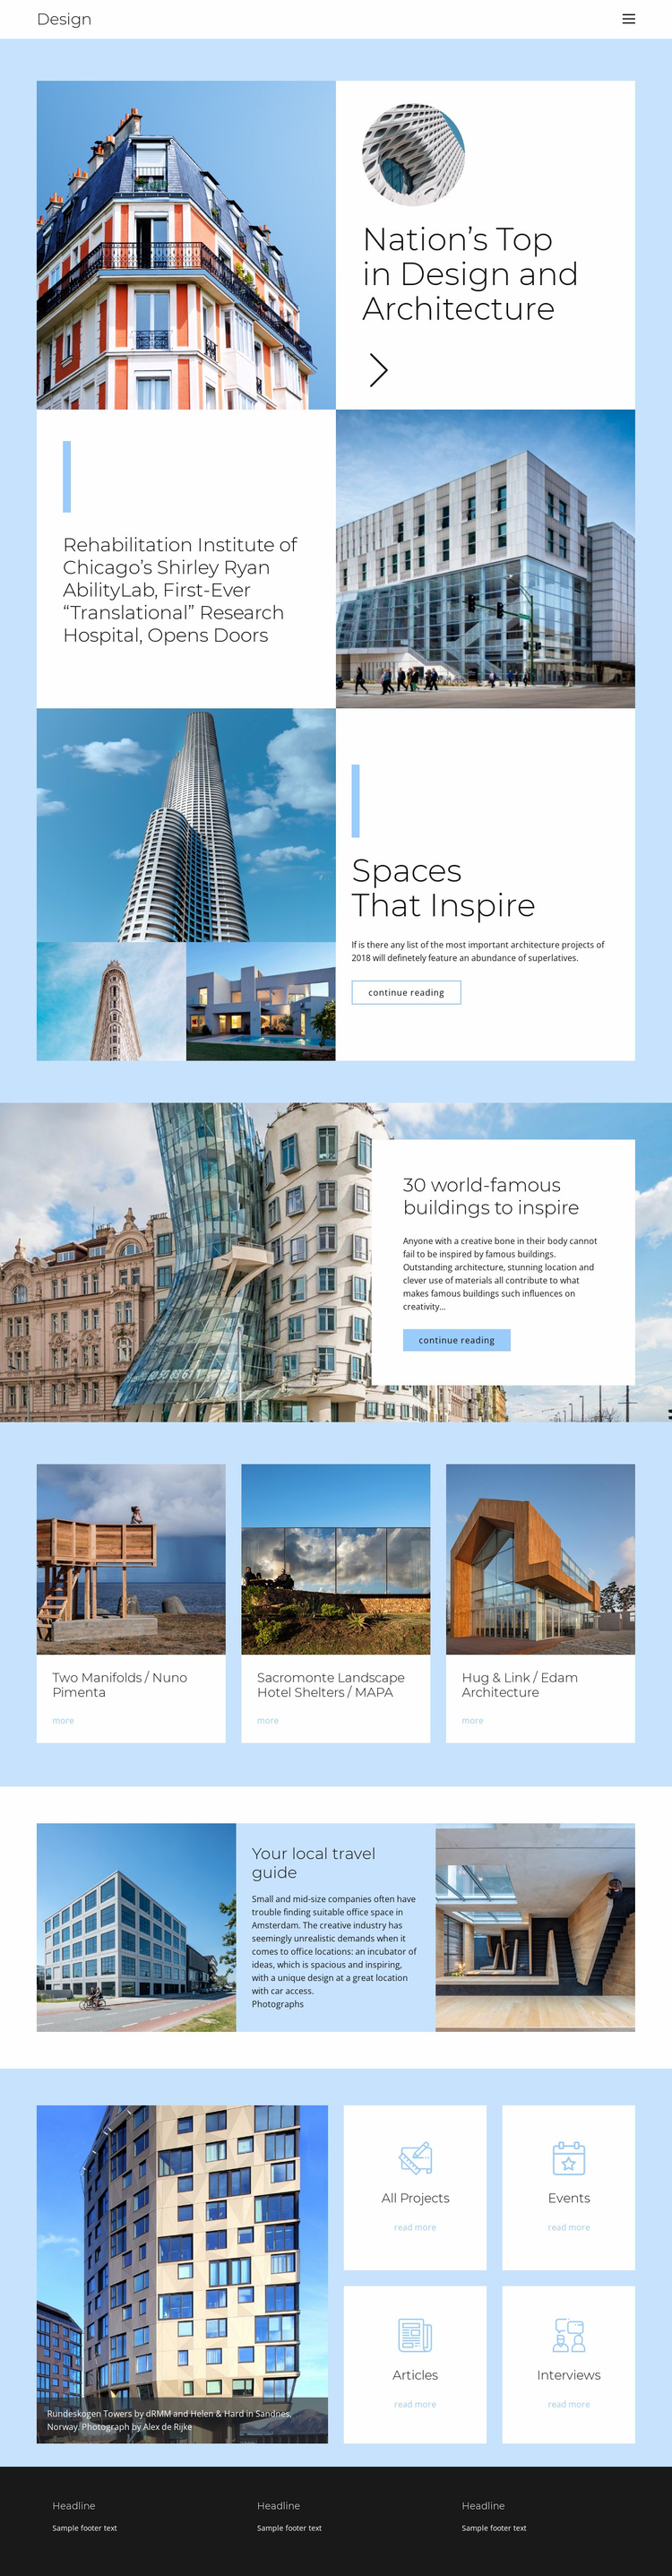 Architecture city guide Website Template